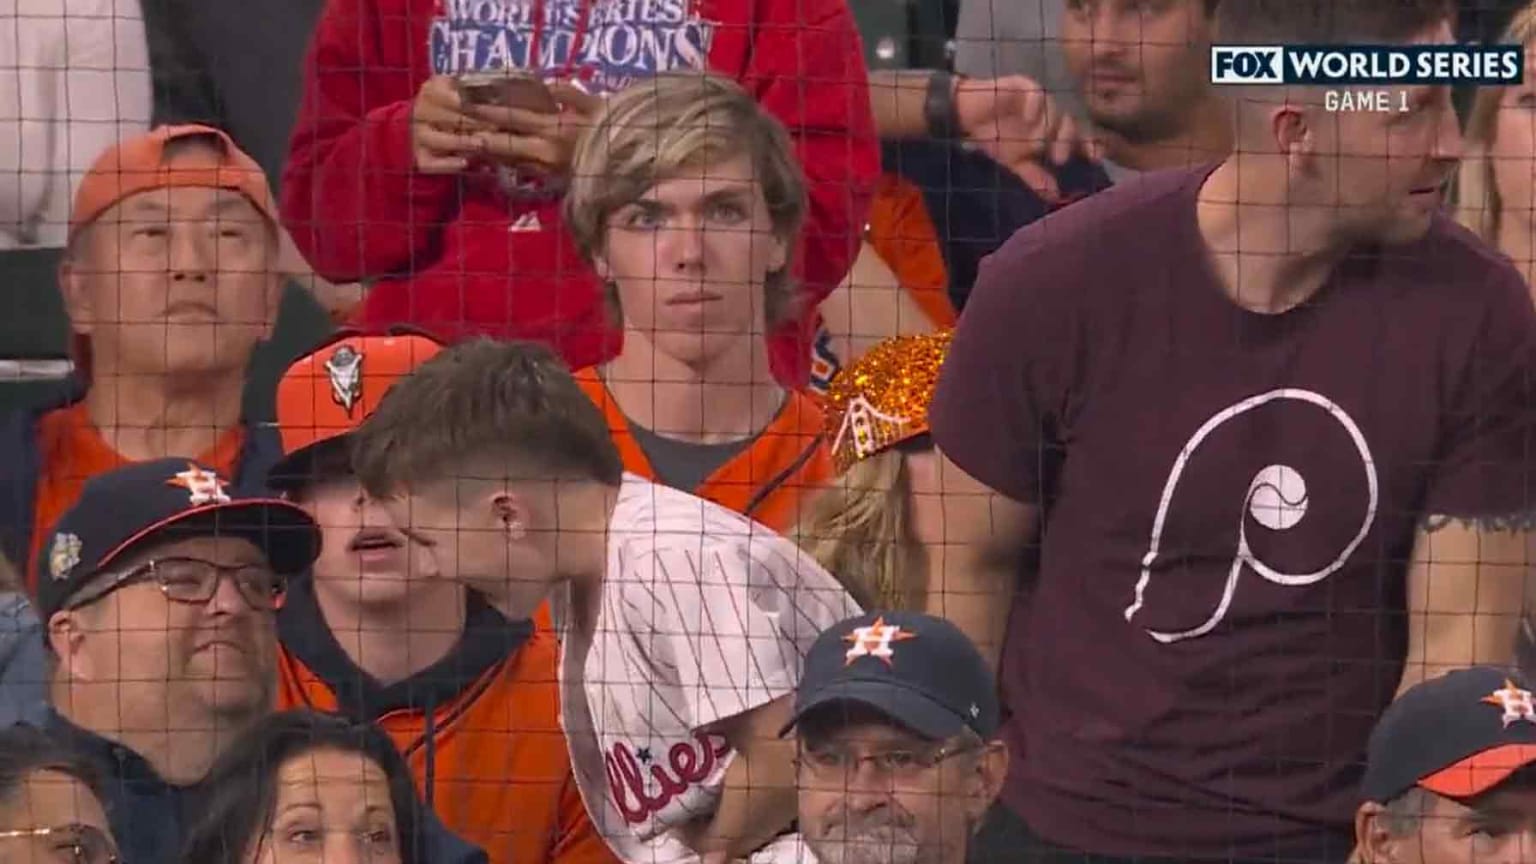 A young Phillies fan interacts with an older Astros fan